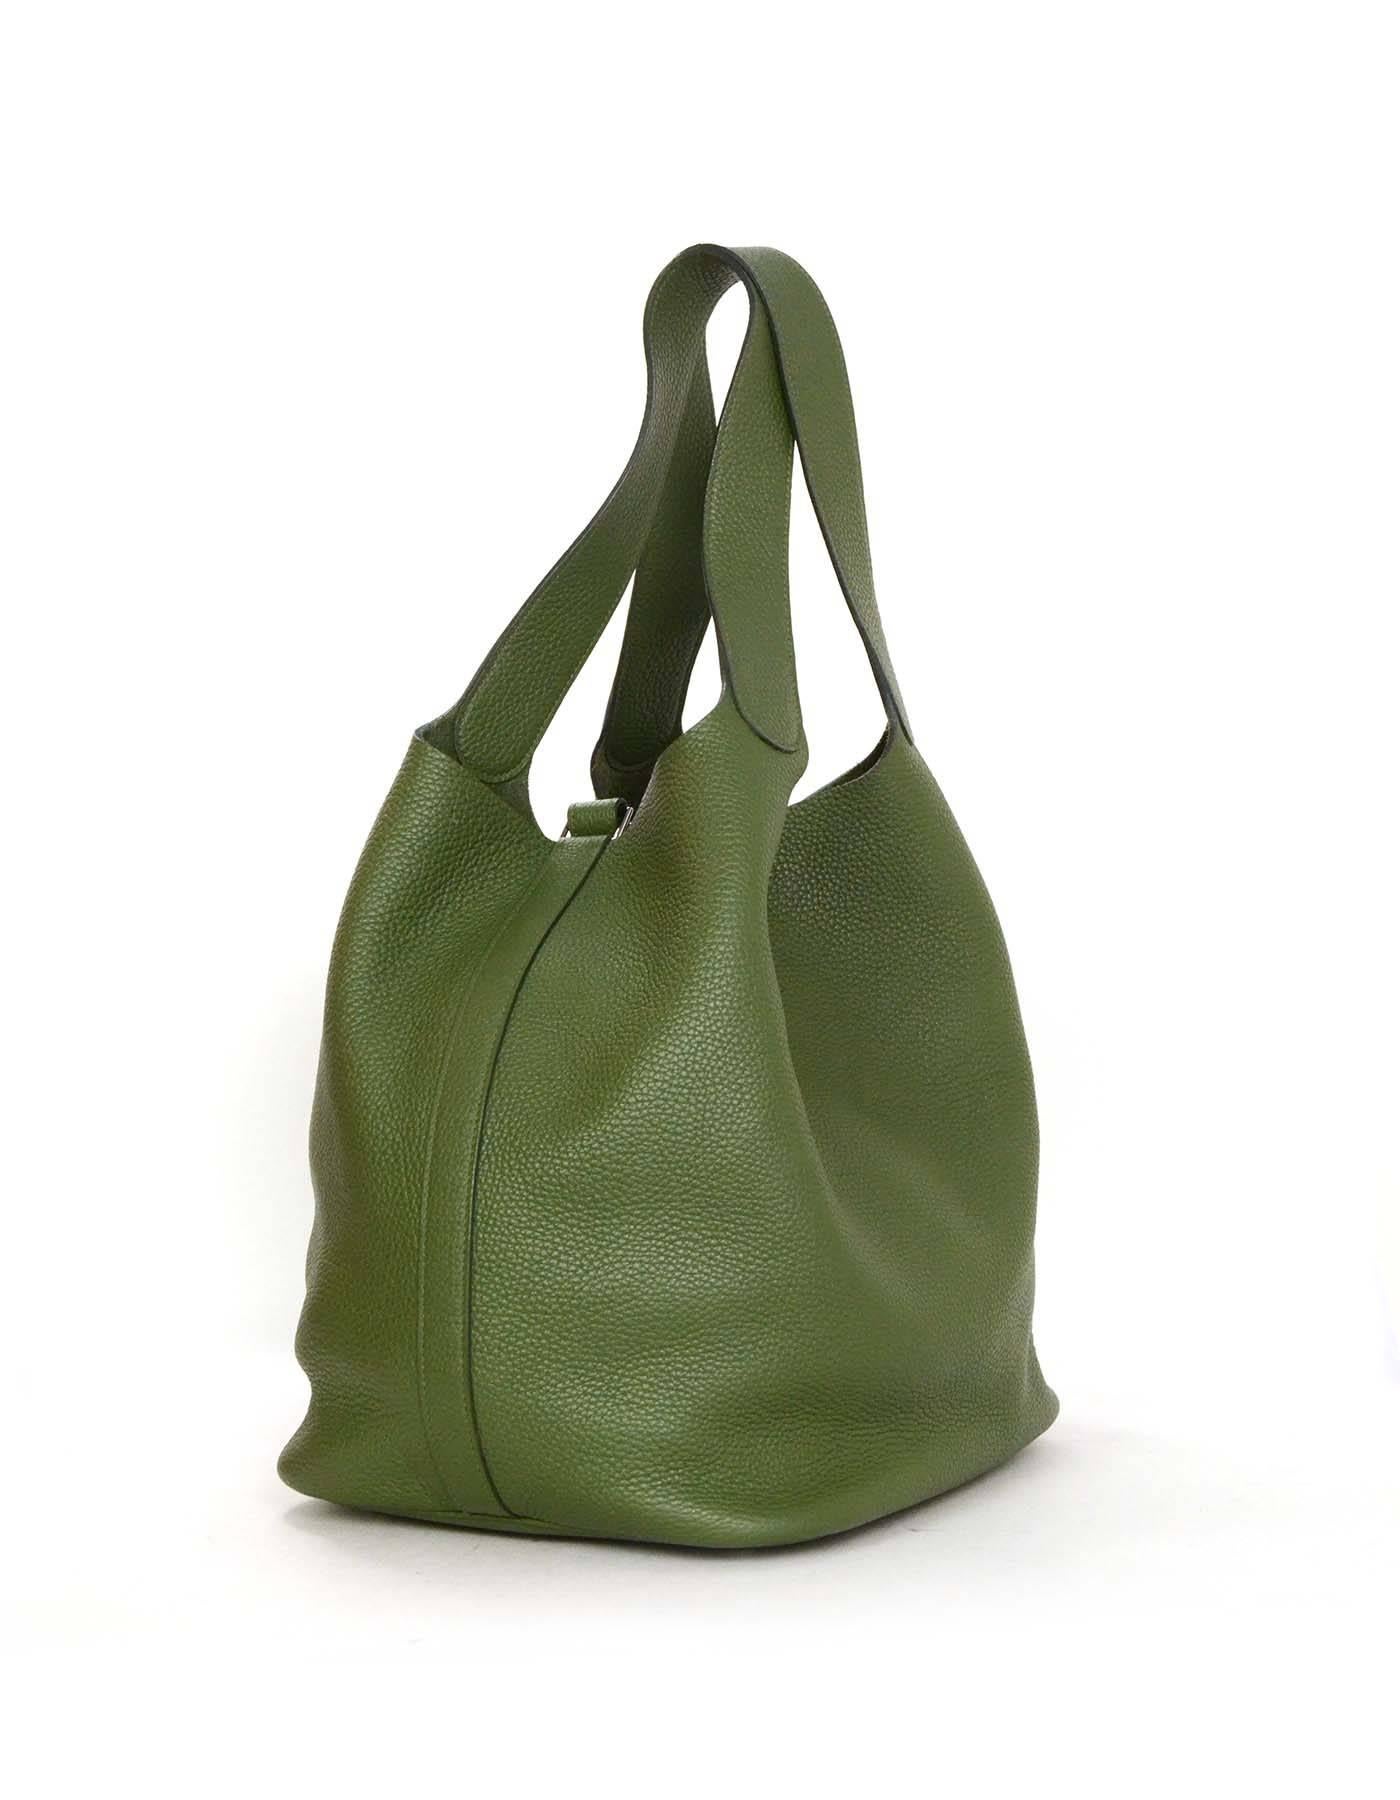 Features open top with strap that closes with oversized lock. Five metal feet protect bottom of the bag.

    Made In: France
    Color: Olive green
    Hardware: Silvertone palladium
    Materials: Clemence leather
    Lining: Green suede
  